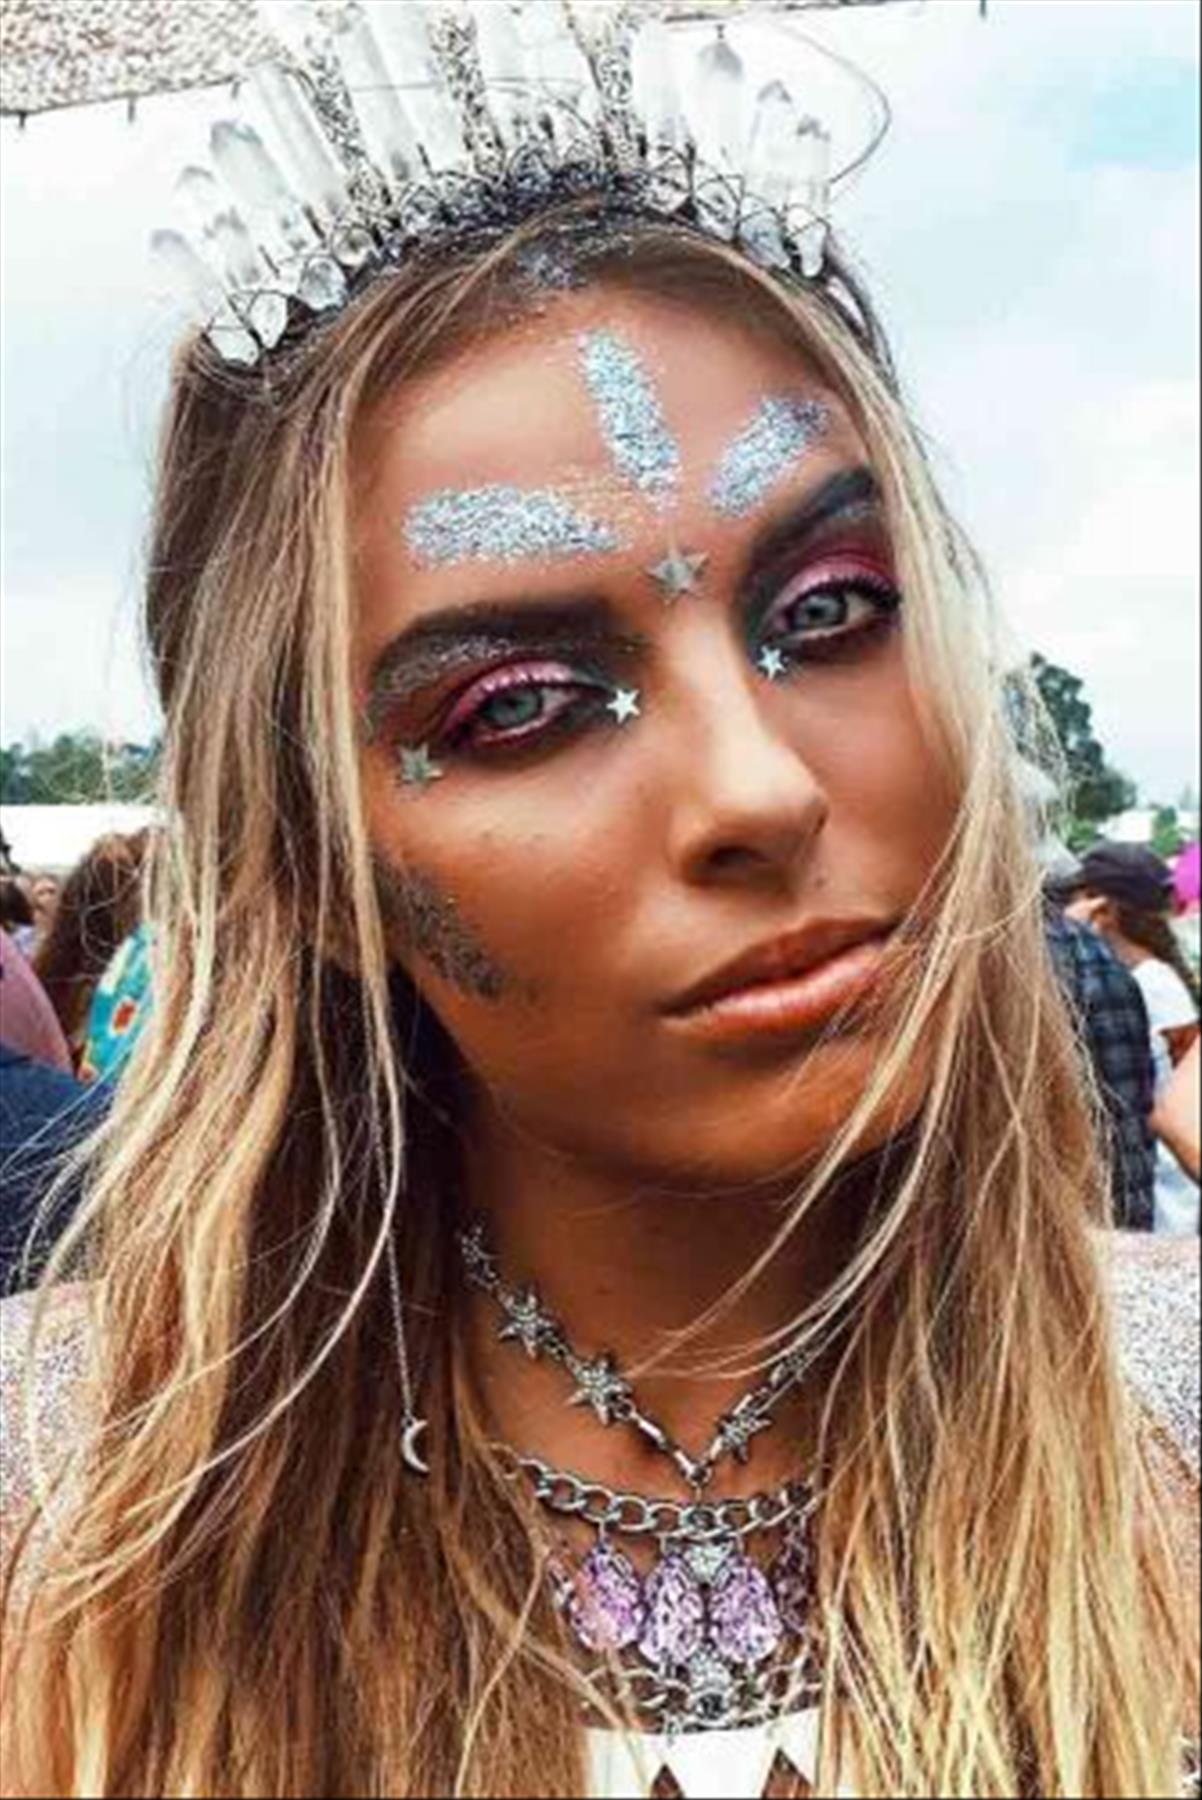 Best Festival Coachella makeup looks to be the real hit